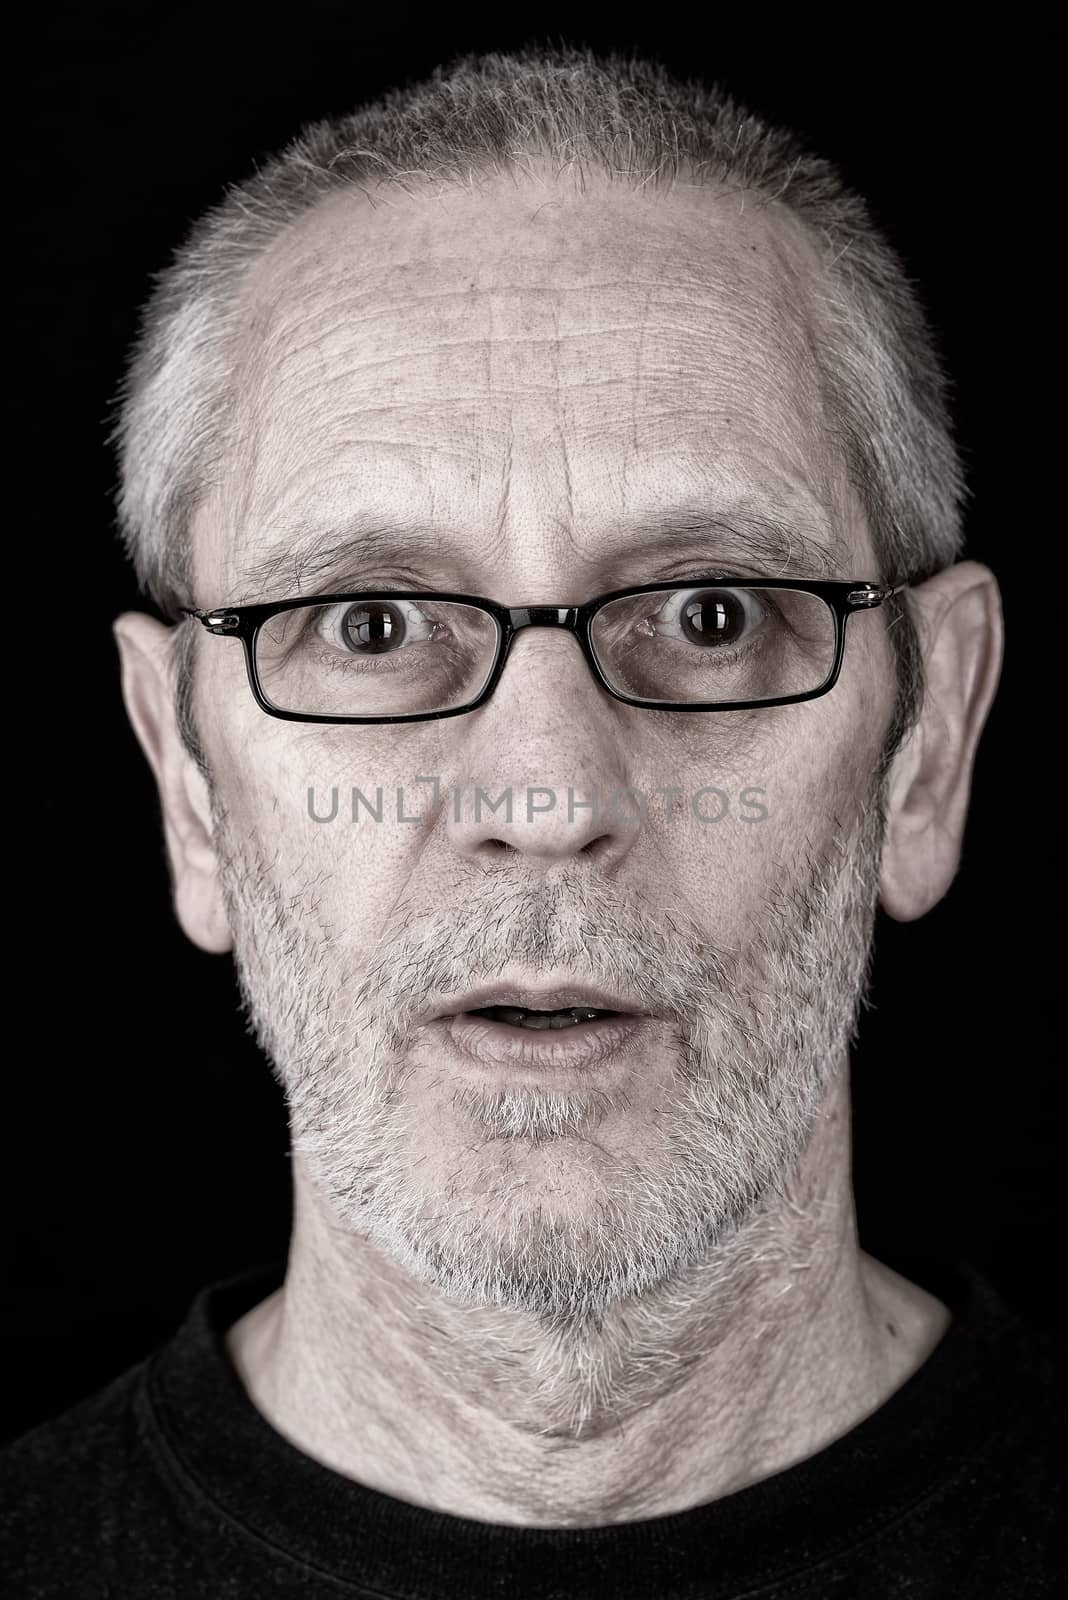 Portrait of a Surprised Man Wearing Glasses by MaxalTamor